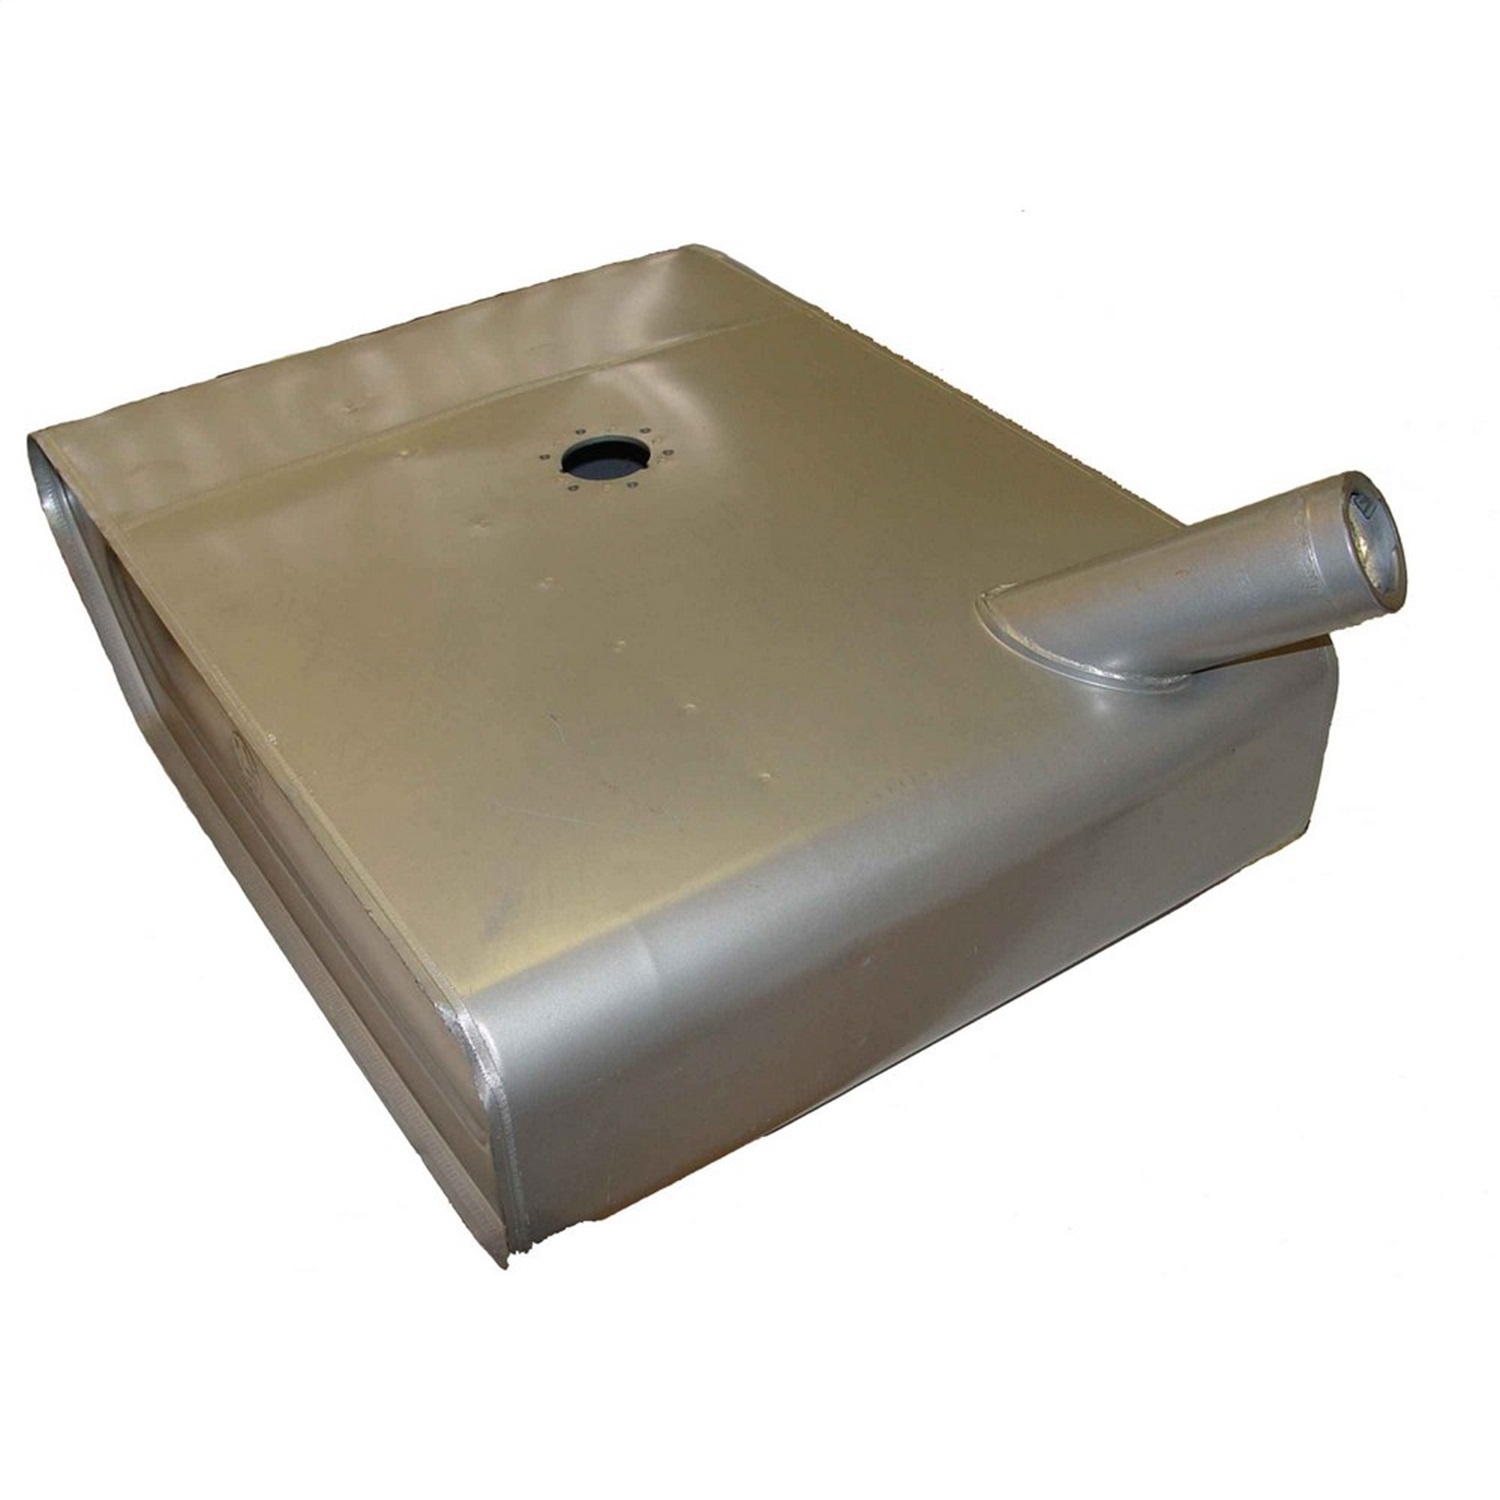 Omix This Replacement Steel Gas/fuel Tank From Omix Fits 55-68 Jeep Cj5 And Cj6., BKGF-17720.06